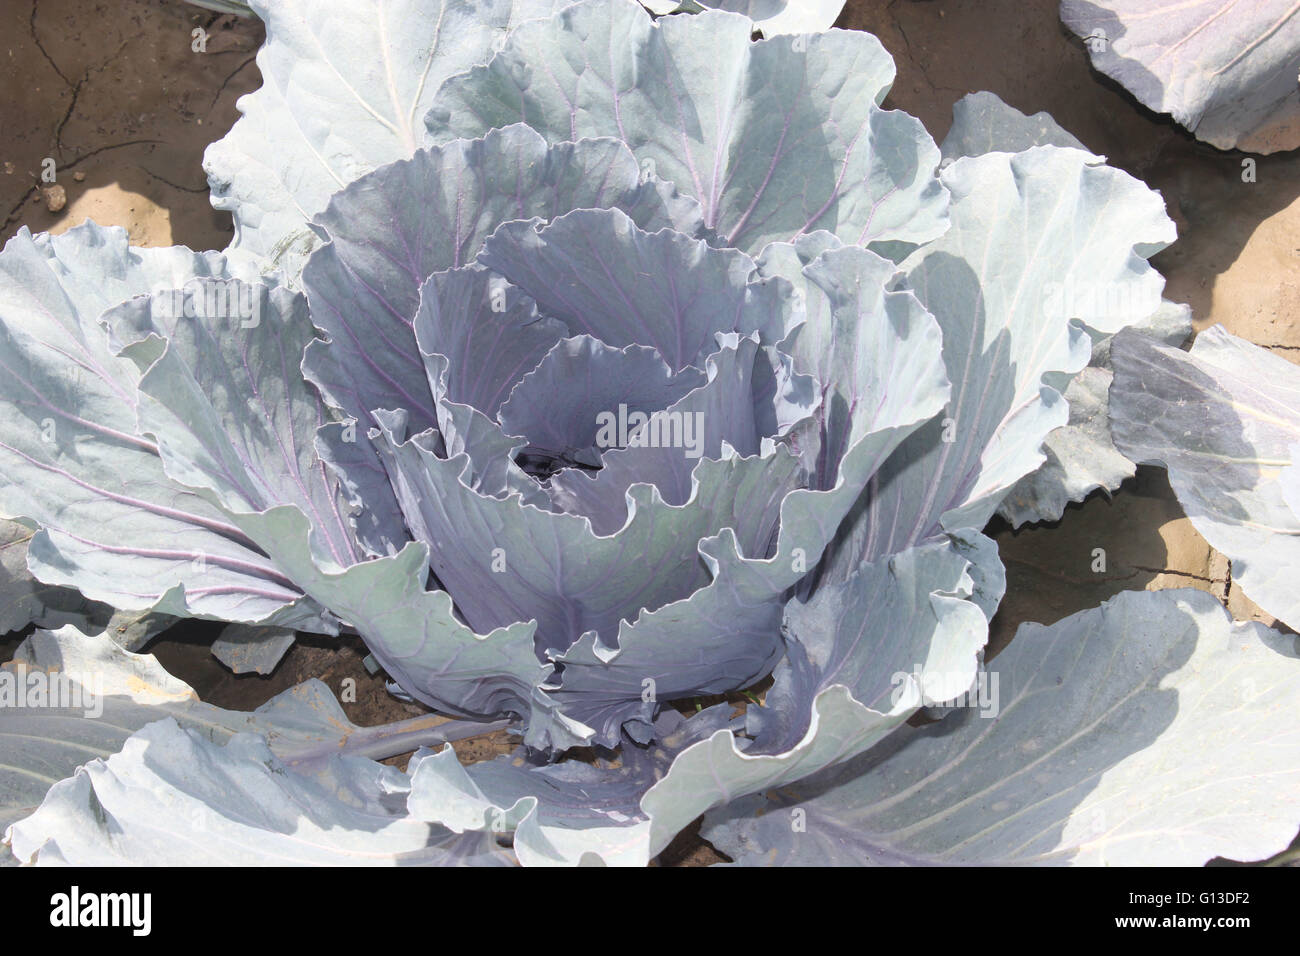 Brassica oleracea var capitata, Red cabbage , cultivar of cabbage with compact large head of red leaves Stock Photo